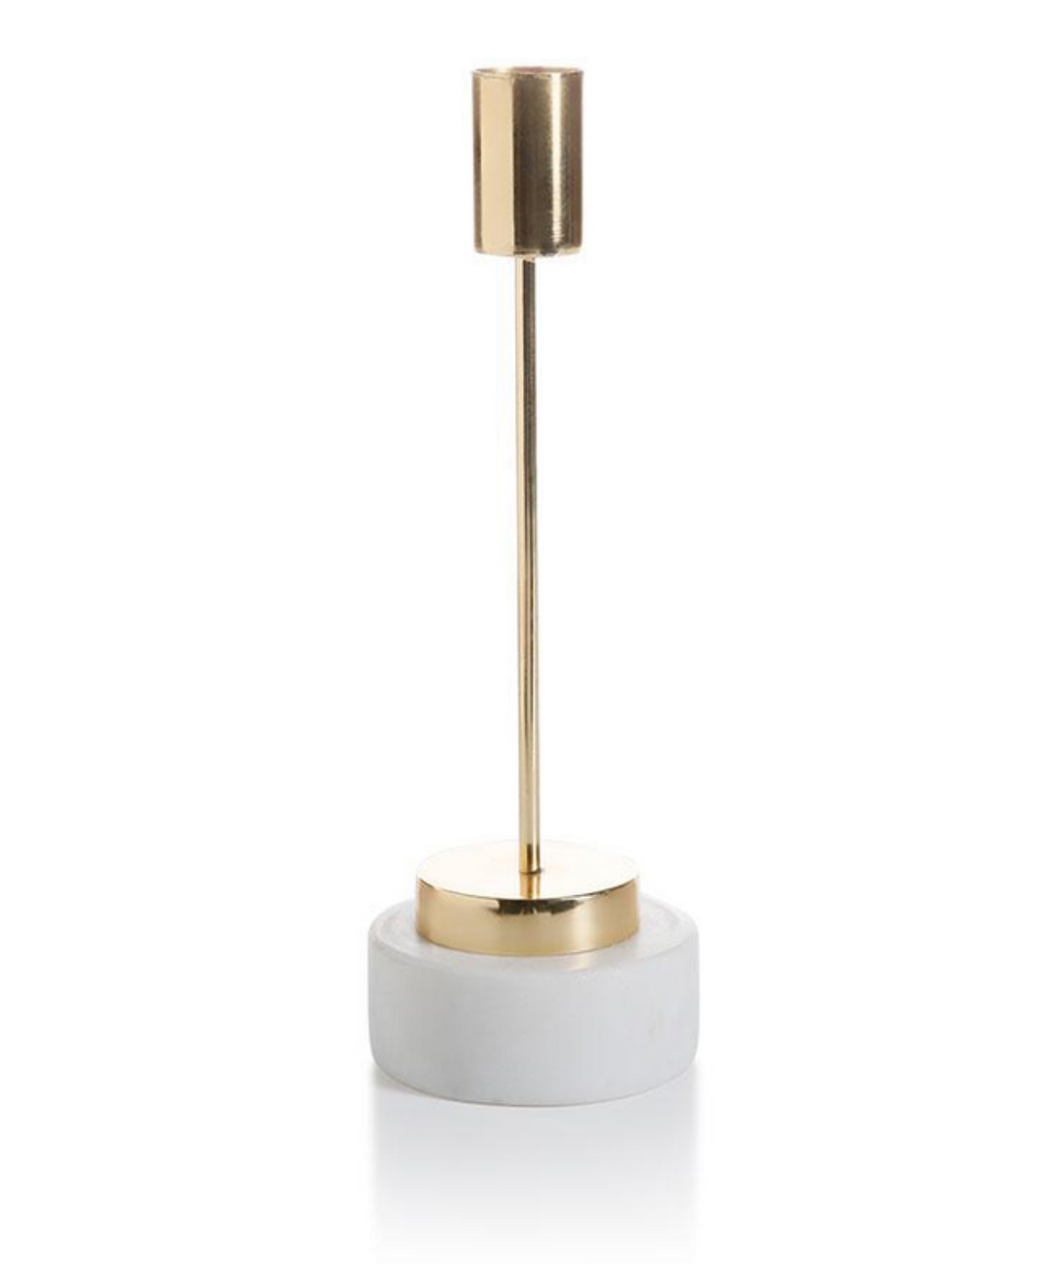 Celine Brass and Marble Candlestick